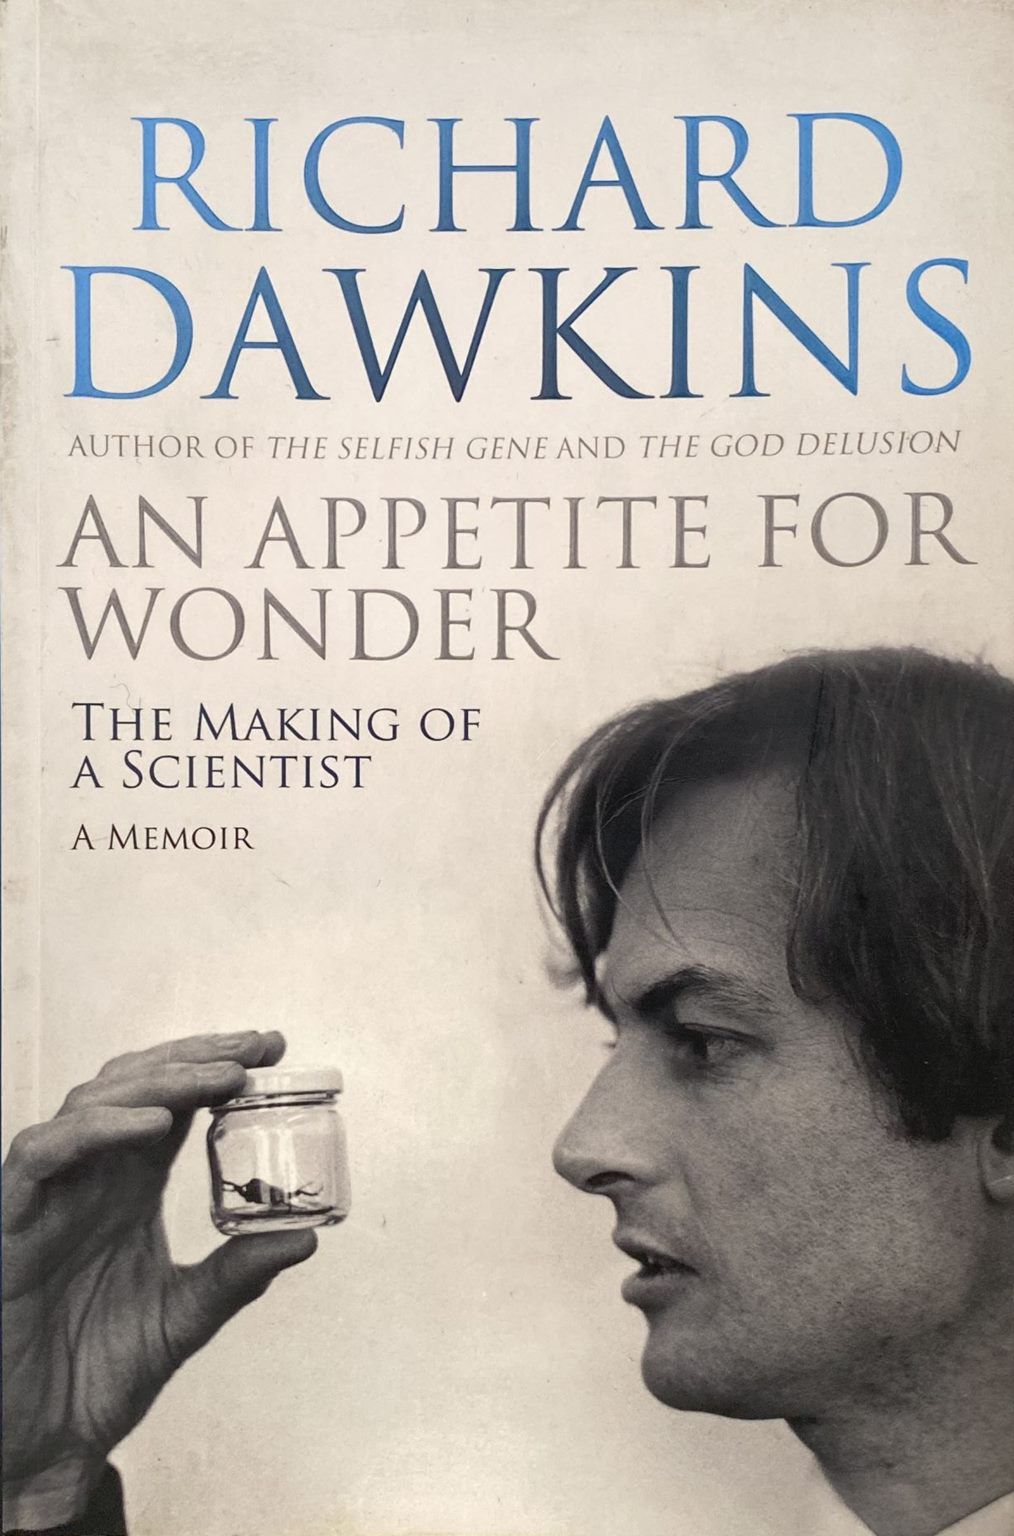 AN APPETITE FOR WONDER: The Making of a Scientist